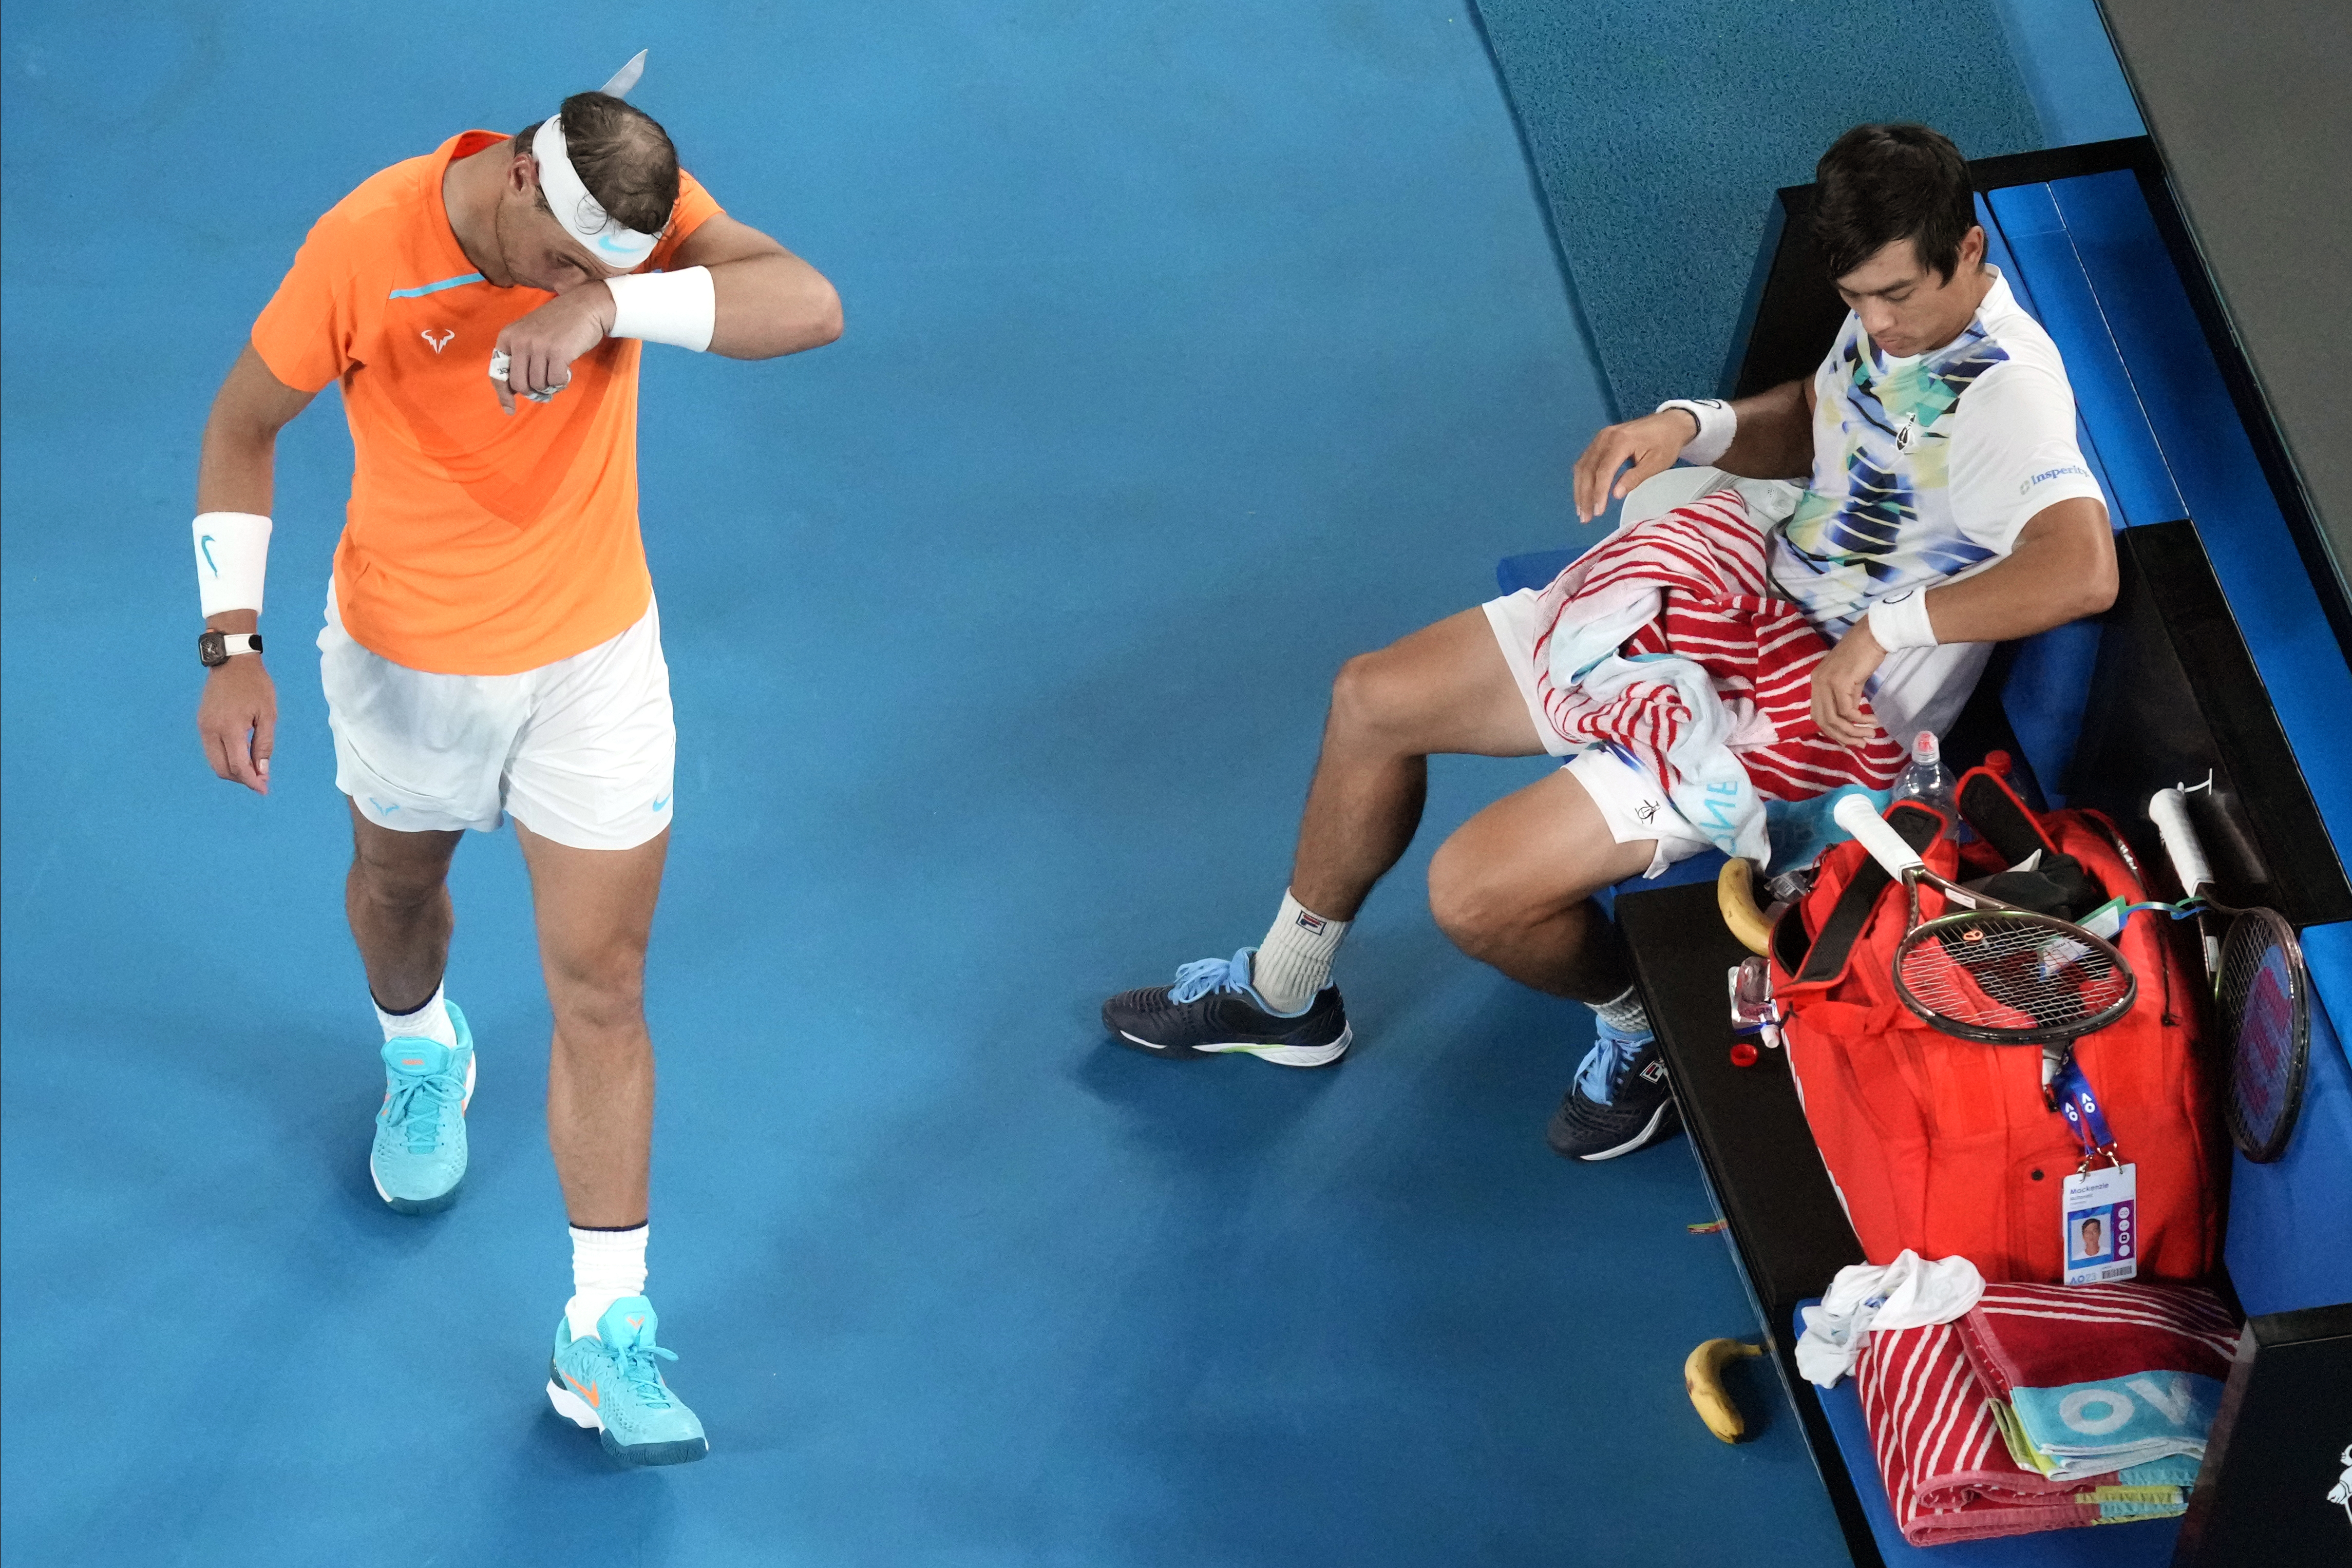 Clearly hurting, Rafael Nadal loses in 2nd round of Australian Open